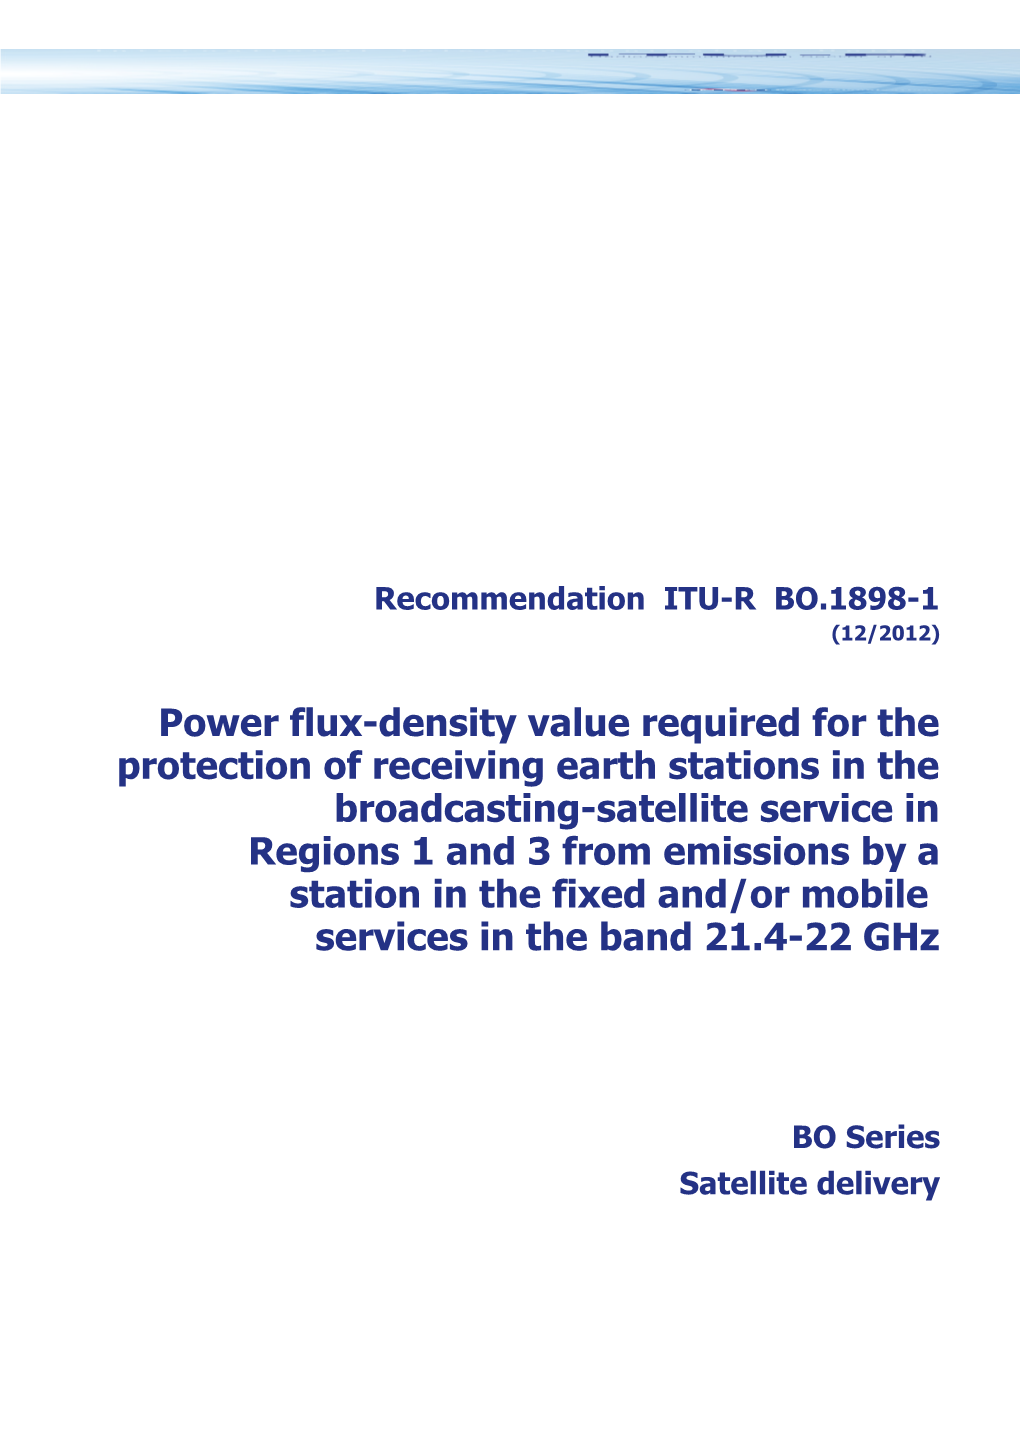 RECOMMENDATION ITU-R BO.1898-1 - Power Flux-Density Value Required for the Protection Of